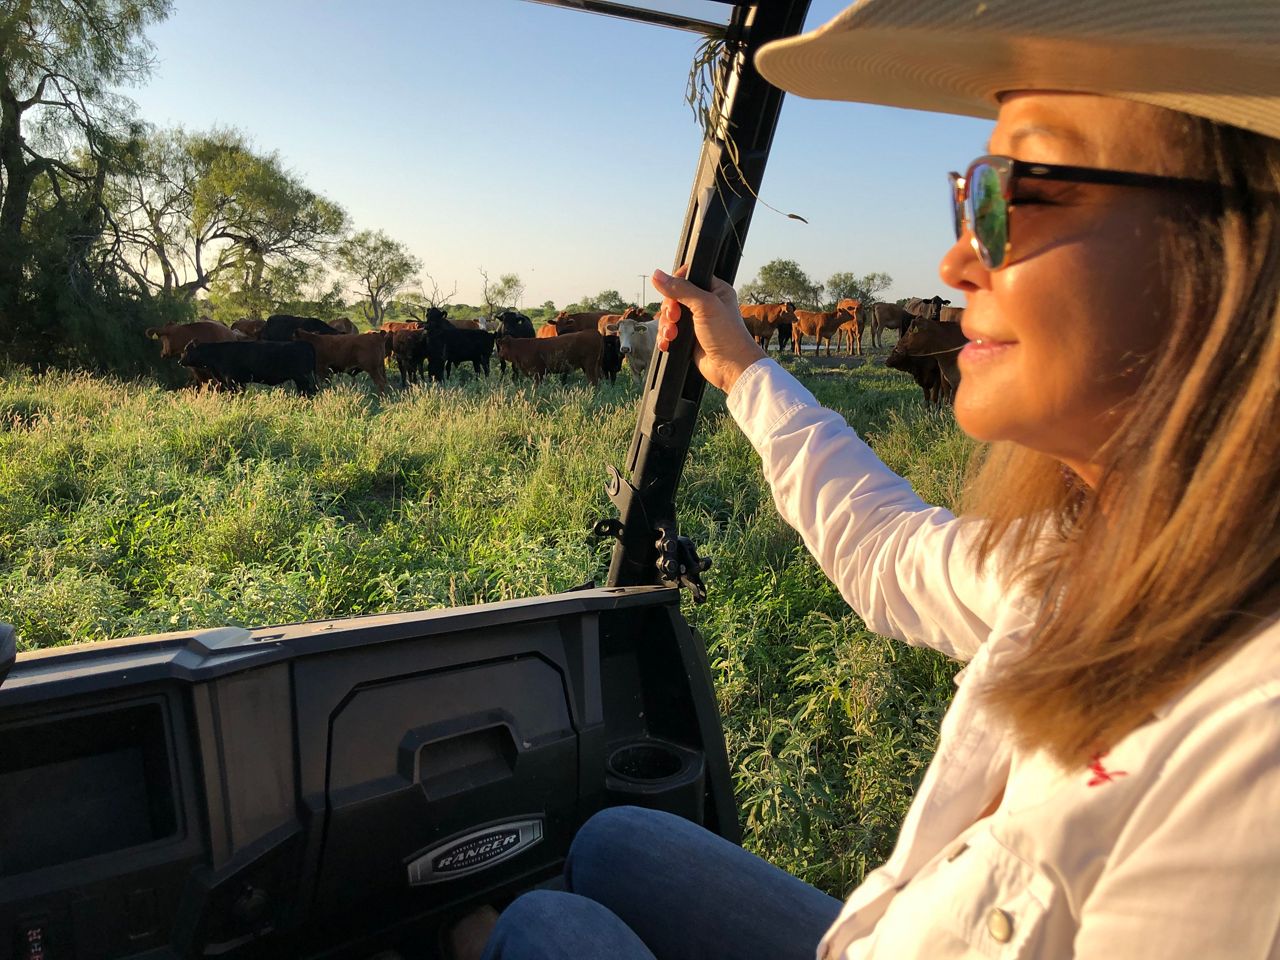 Stephanie Martinez looks out on the ranch while her husband drives. (Spectrum News)